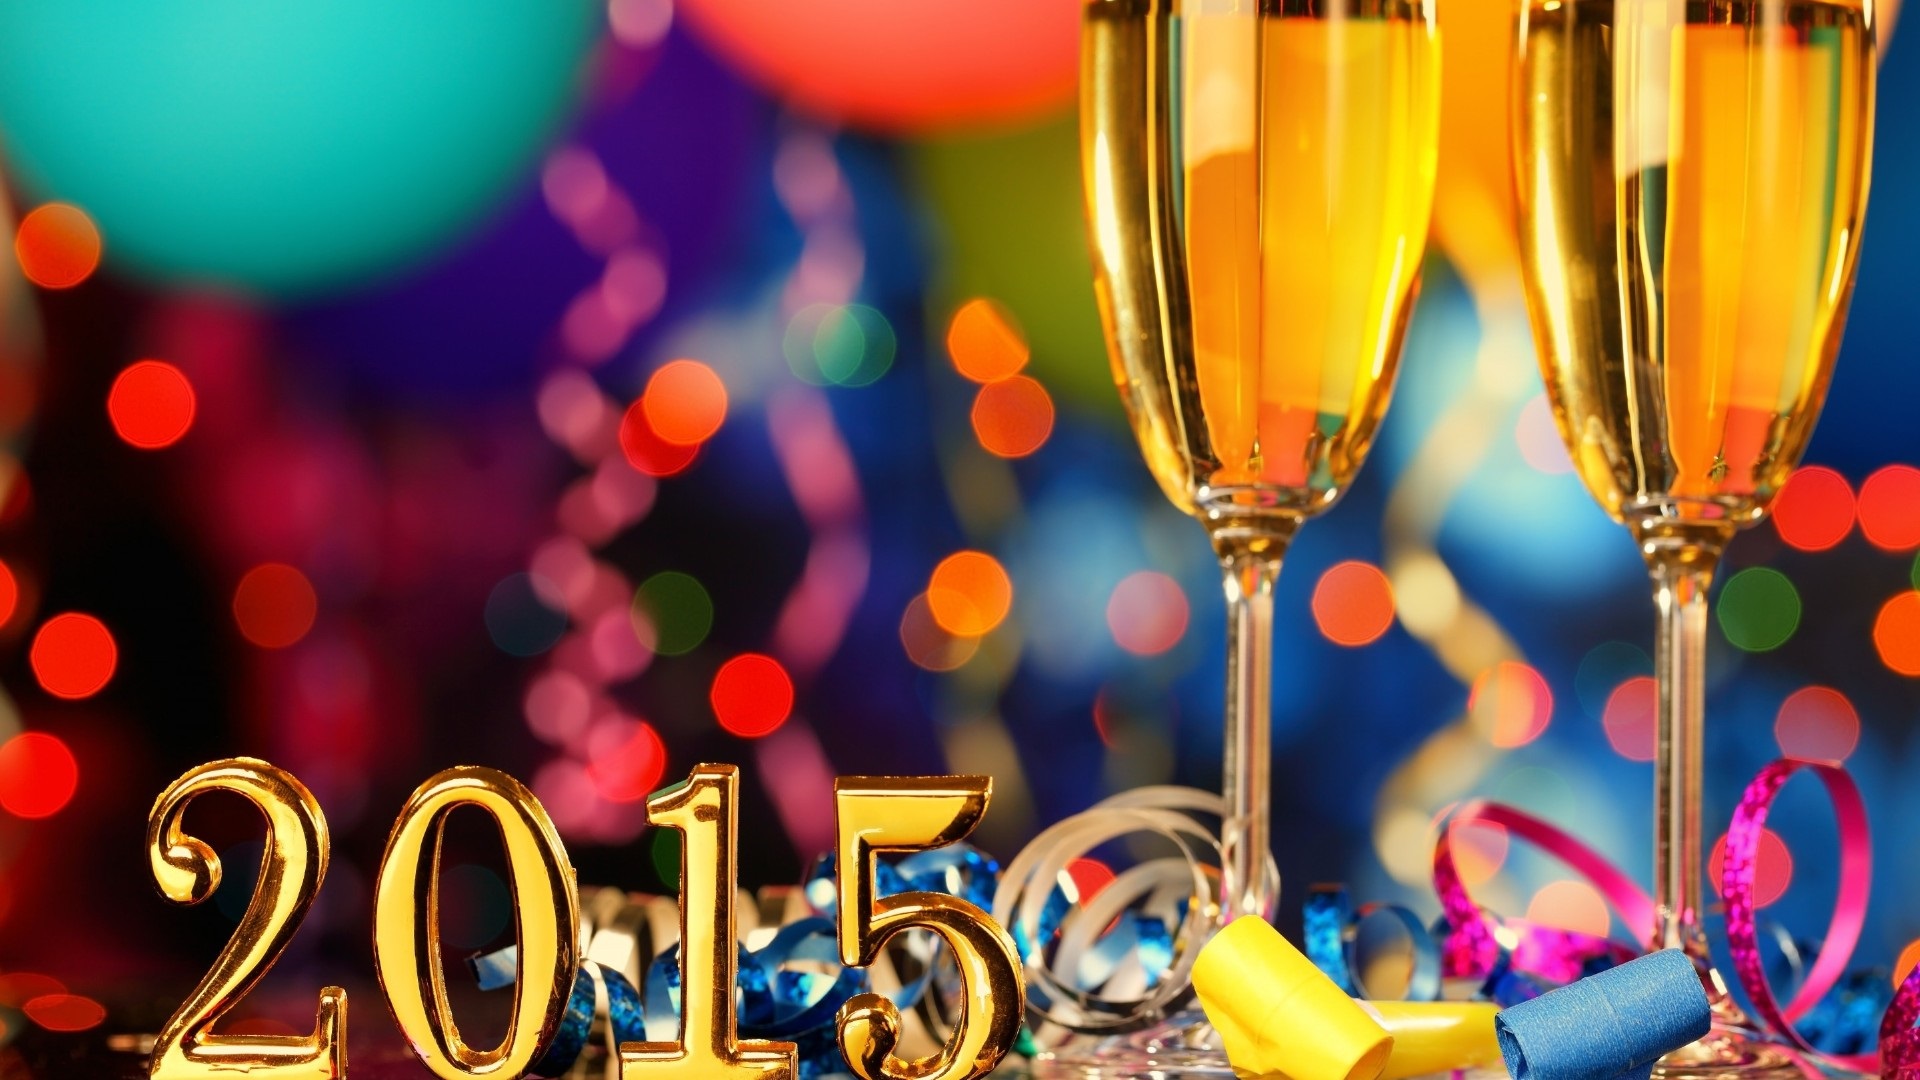 Free Happy New Years Champagne 2015 HD Wallpaper Images #8100 | HD ...